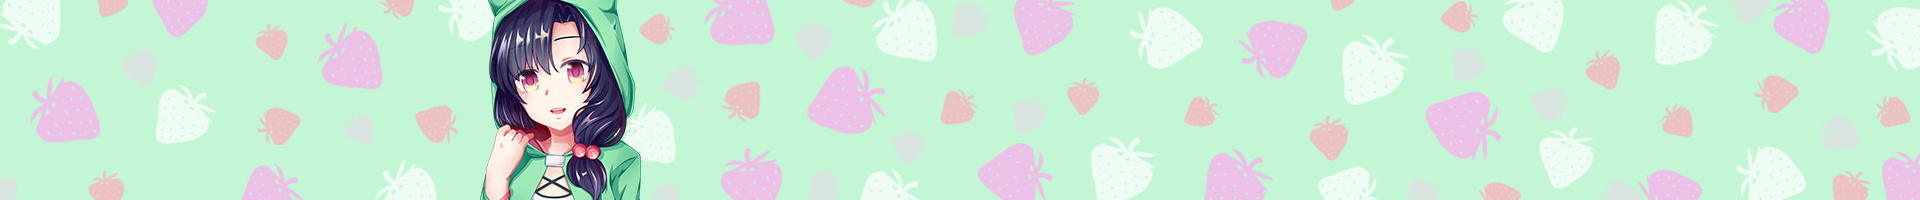 Daisy_Banner_Test.png